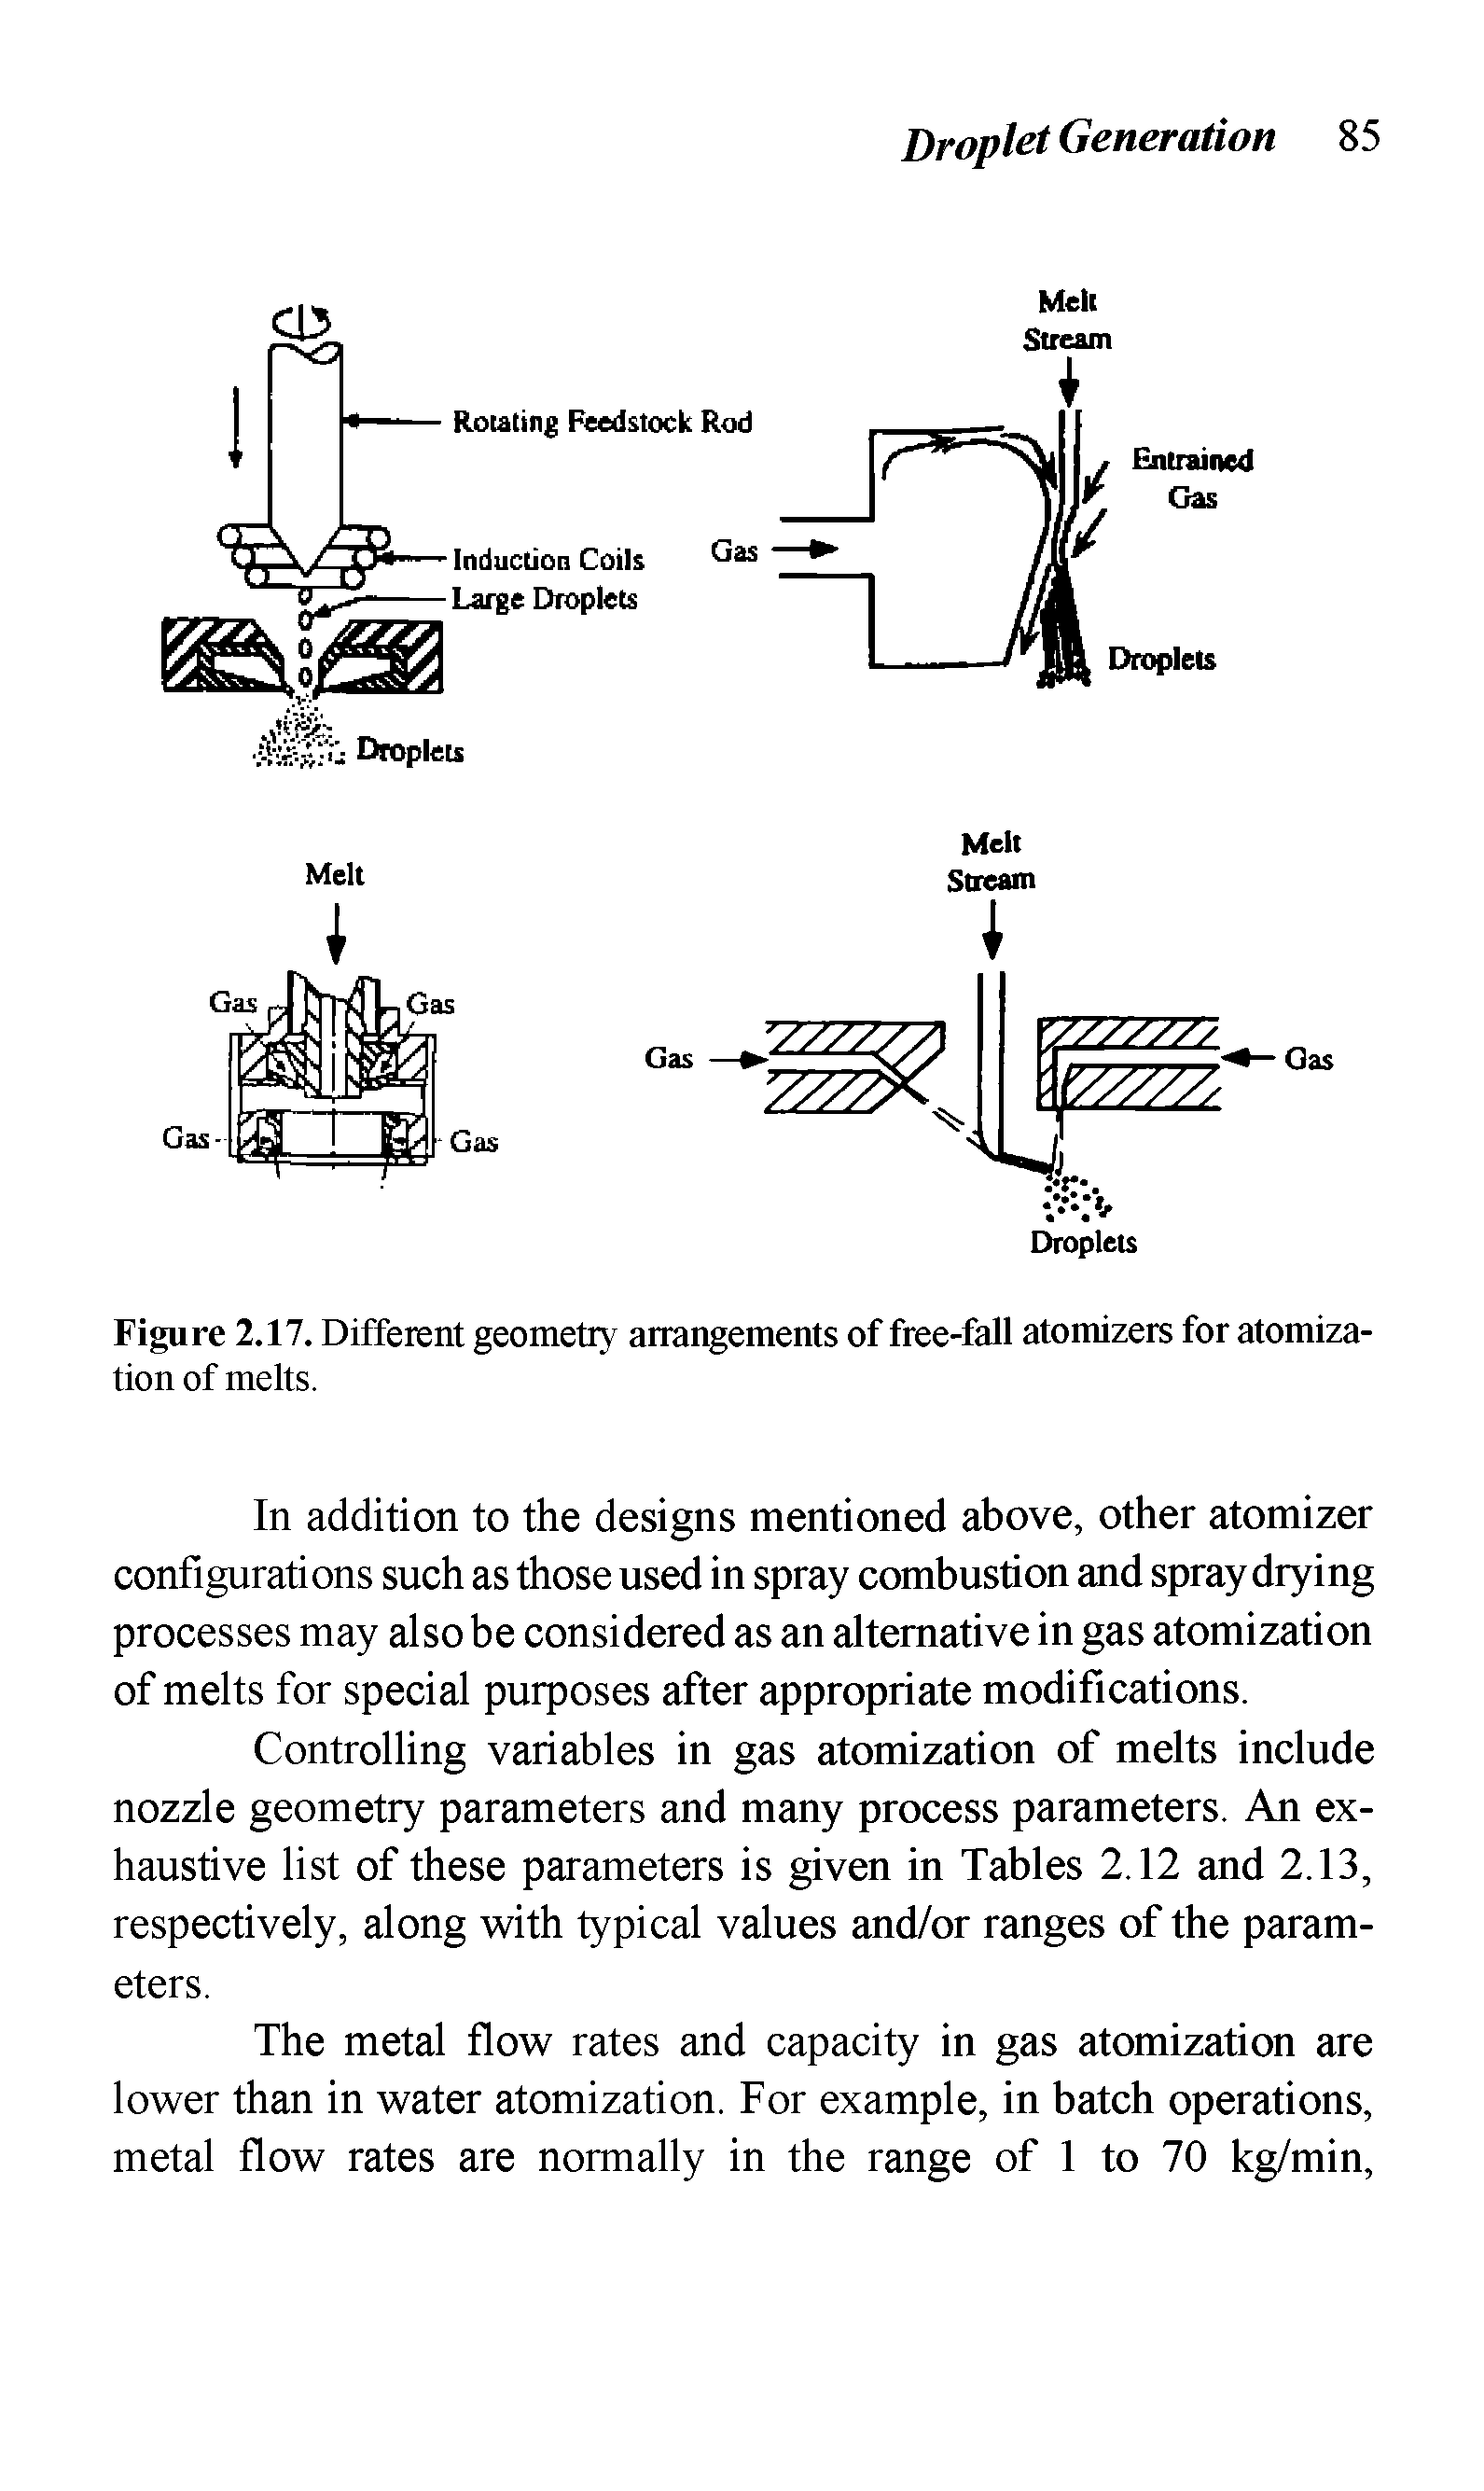 Figure 2.17. Different geometry arrangements of free-fall atomizers for atomization of melts.